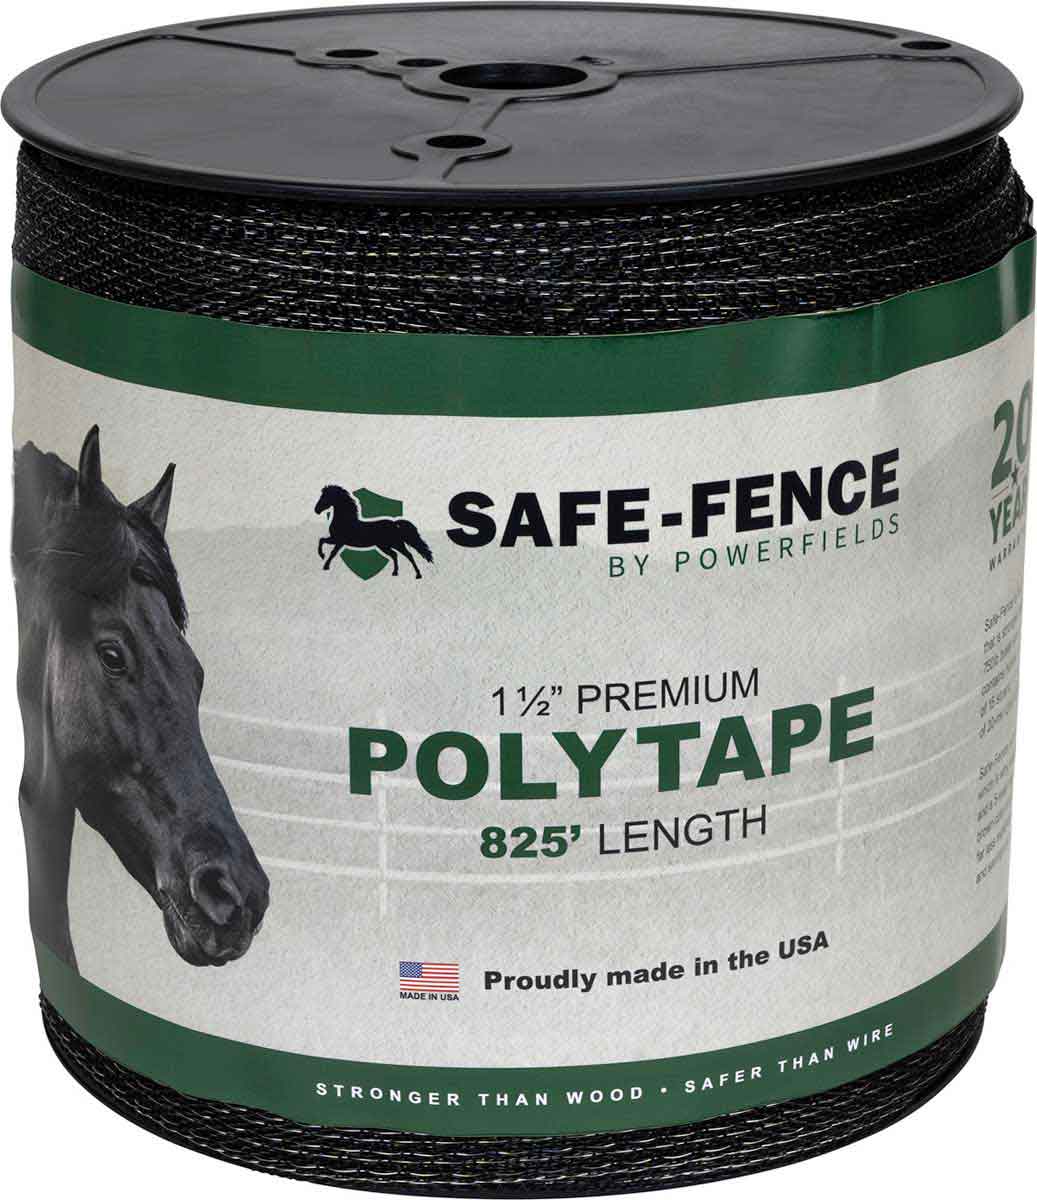 Livestock NEW Gallagher ELECTRIC FENCE Locking 1 1/2" Poly Tape INSULATOR 